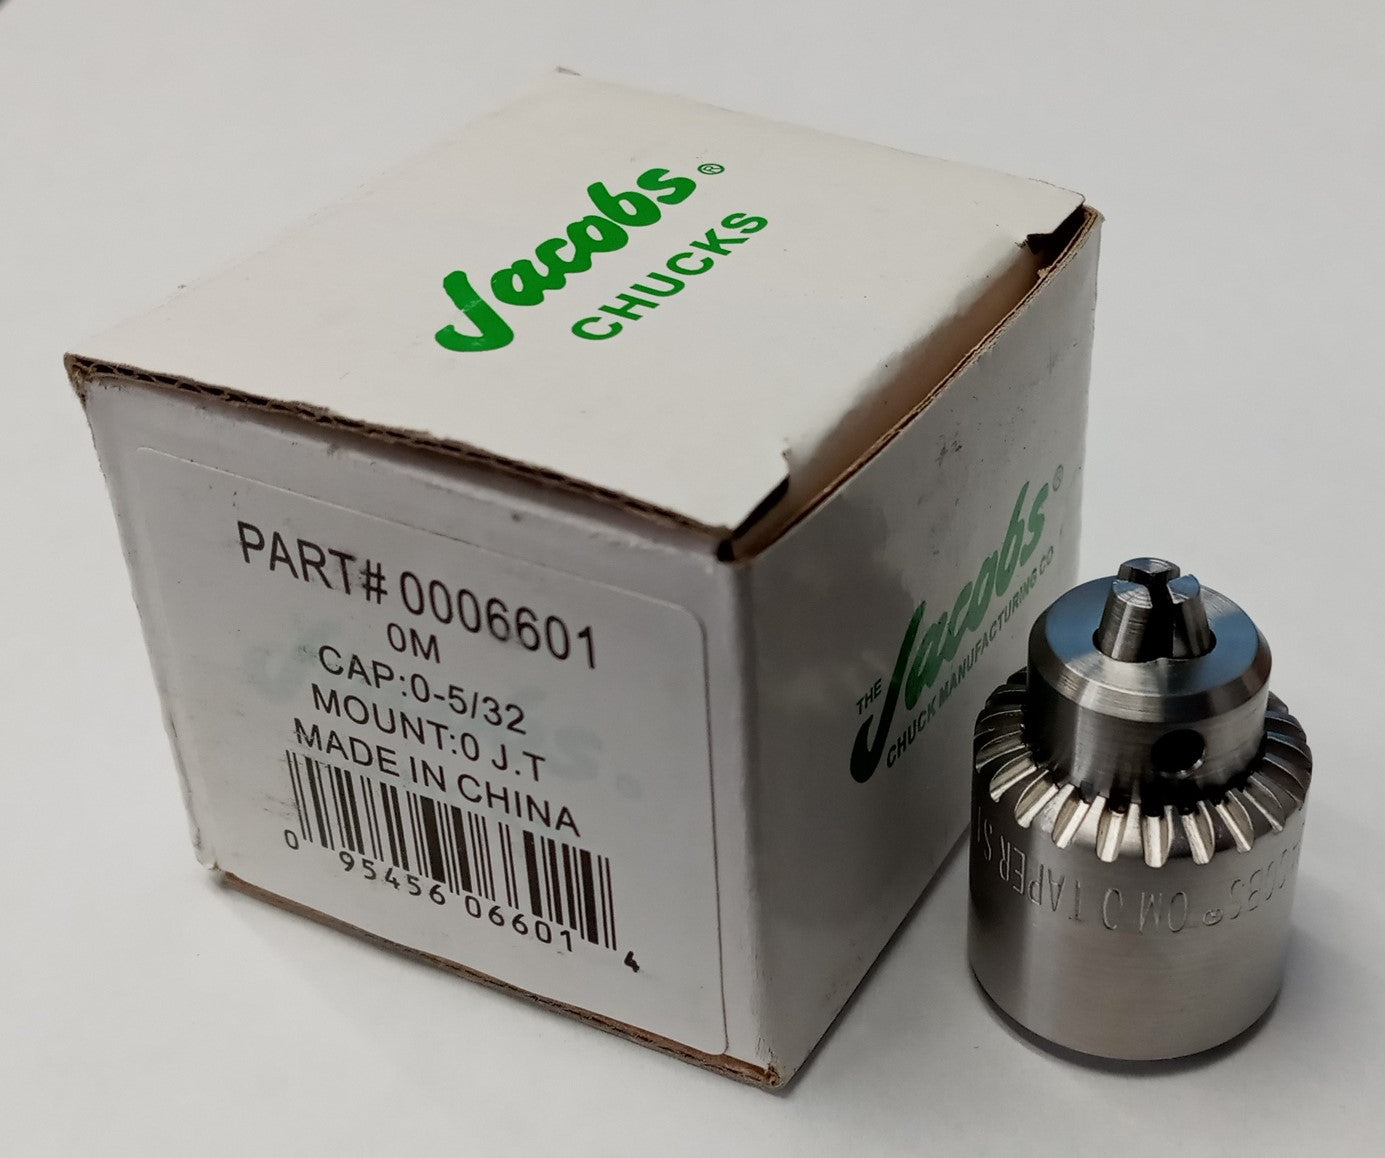 Jacobs 6601 0M 0-5/32" Stainless Chuck Mount 0 Jacobs Taper